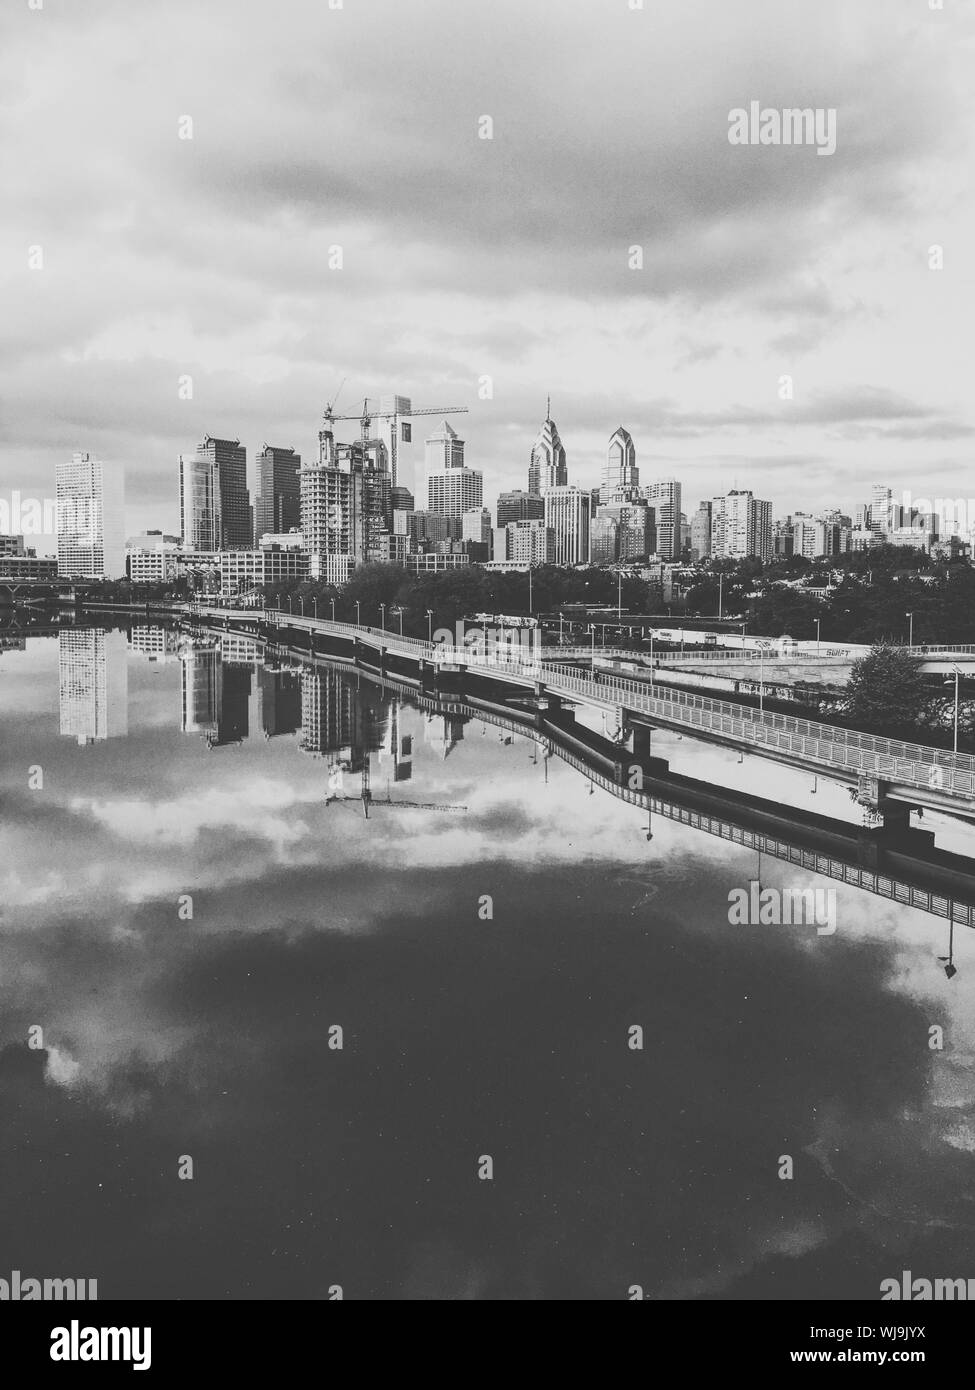 Reflection Of Bridge And Buildings On Schuylkill River Against Cloudy Sky Stock Photo